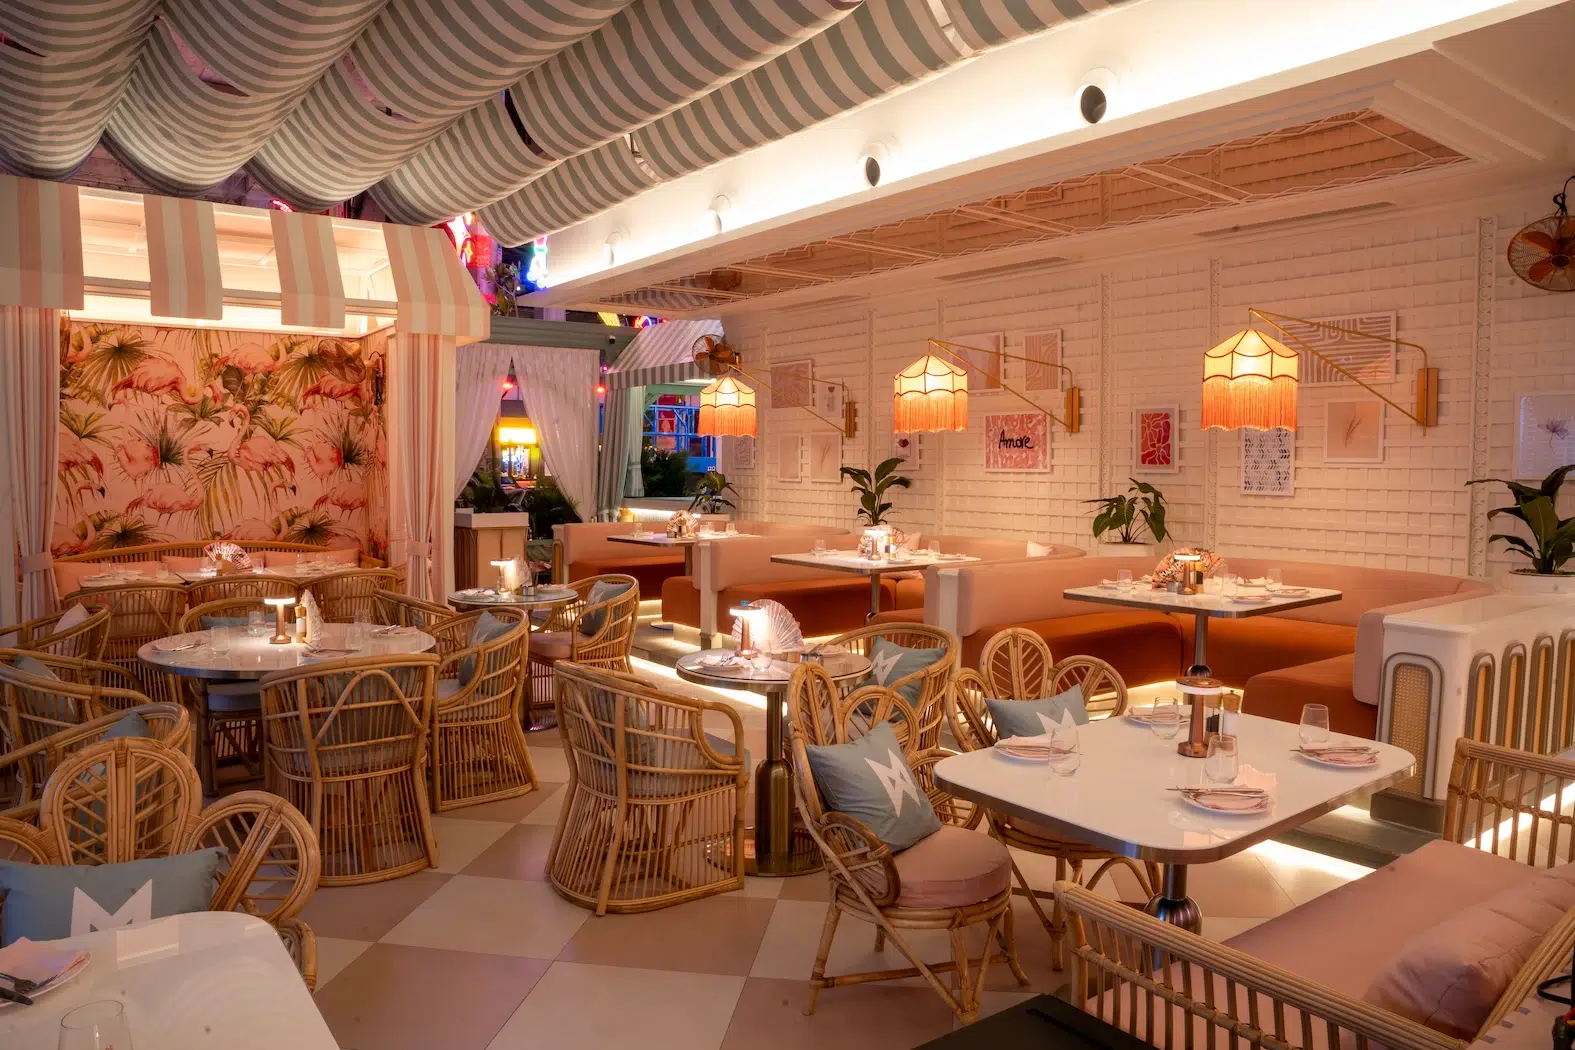 This is the photo of Mami Rose restaurant's interior on the 5th floor of EmSphere mall in Bangkok (Thailand). This restaurant located near Phrom Pong BTS station and looks like a vintage old fashion Miami restaurant.